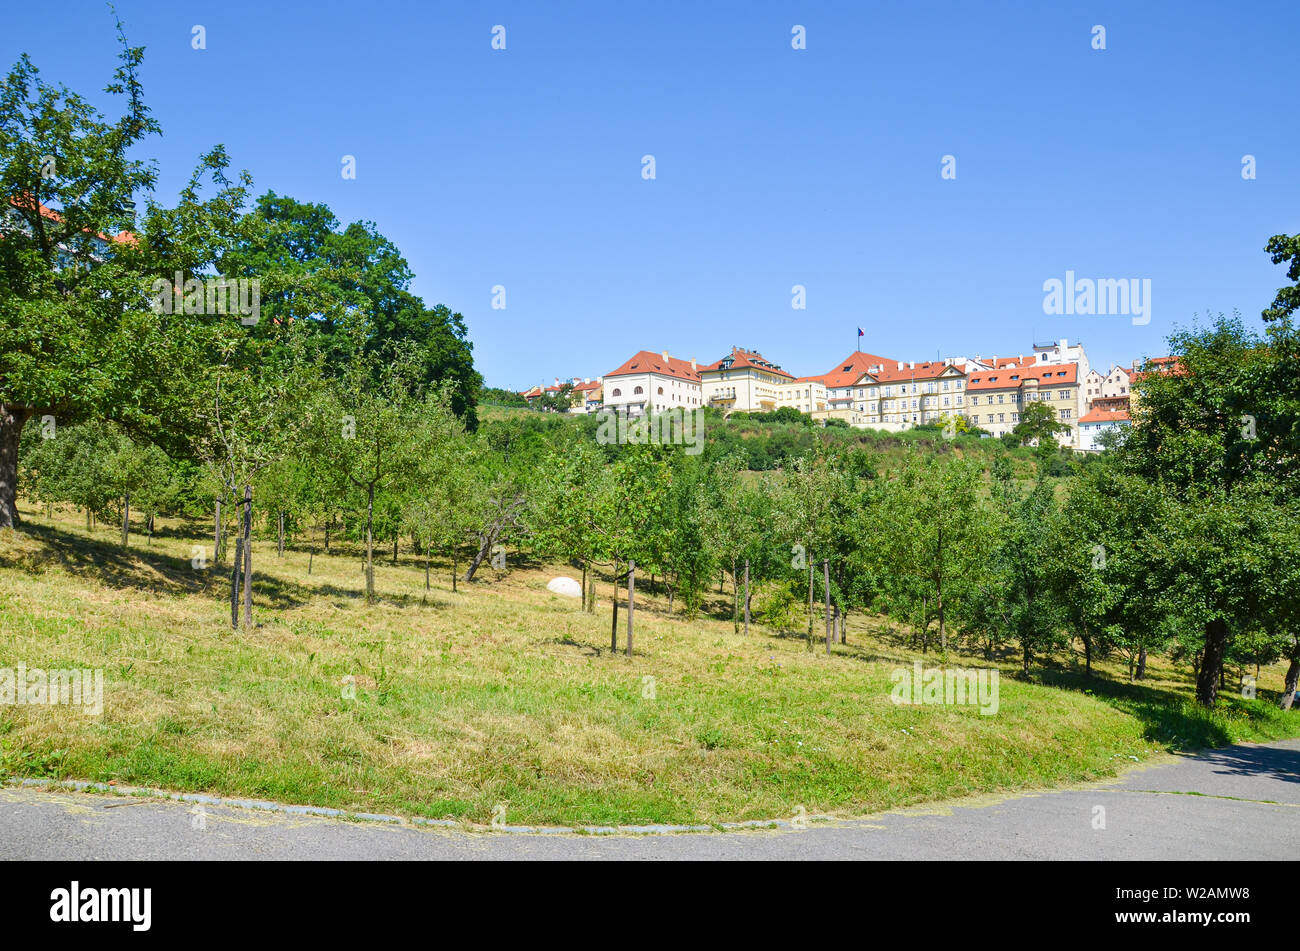 Beautiful green gardens on Petrin Hill in Prague, Czech Republic. Historical buildings in background. Taken on sunny day, blue sky. Popular tourist spot offering view over beautiful city. Czechia. Stock Photo